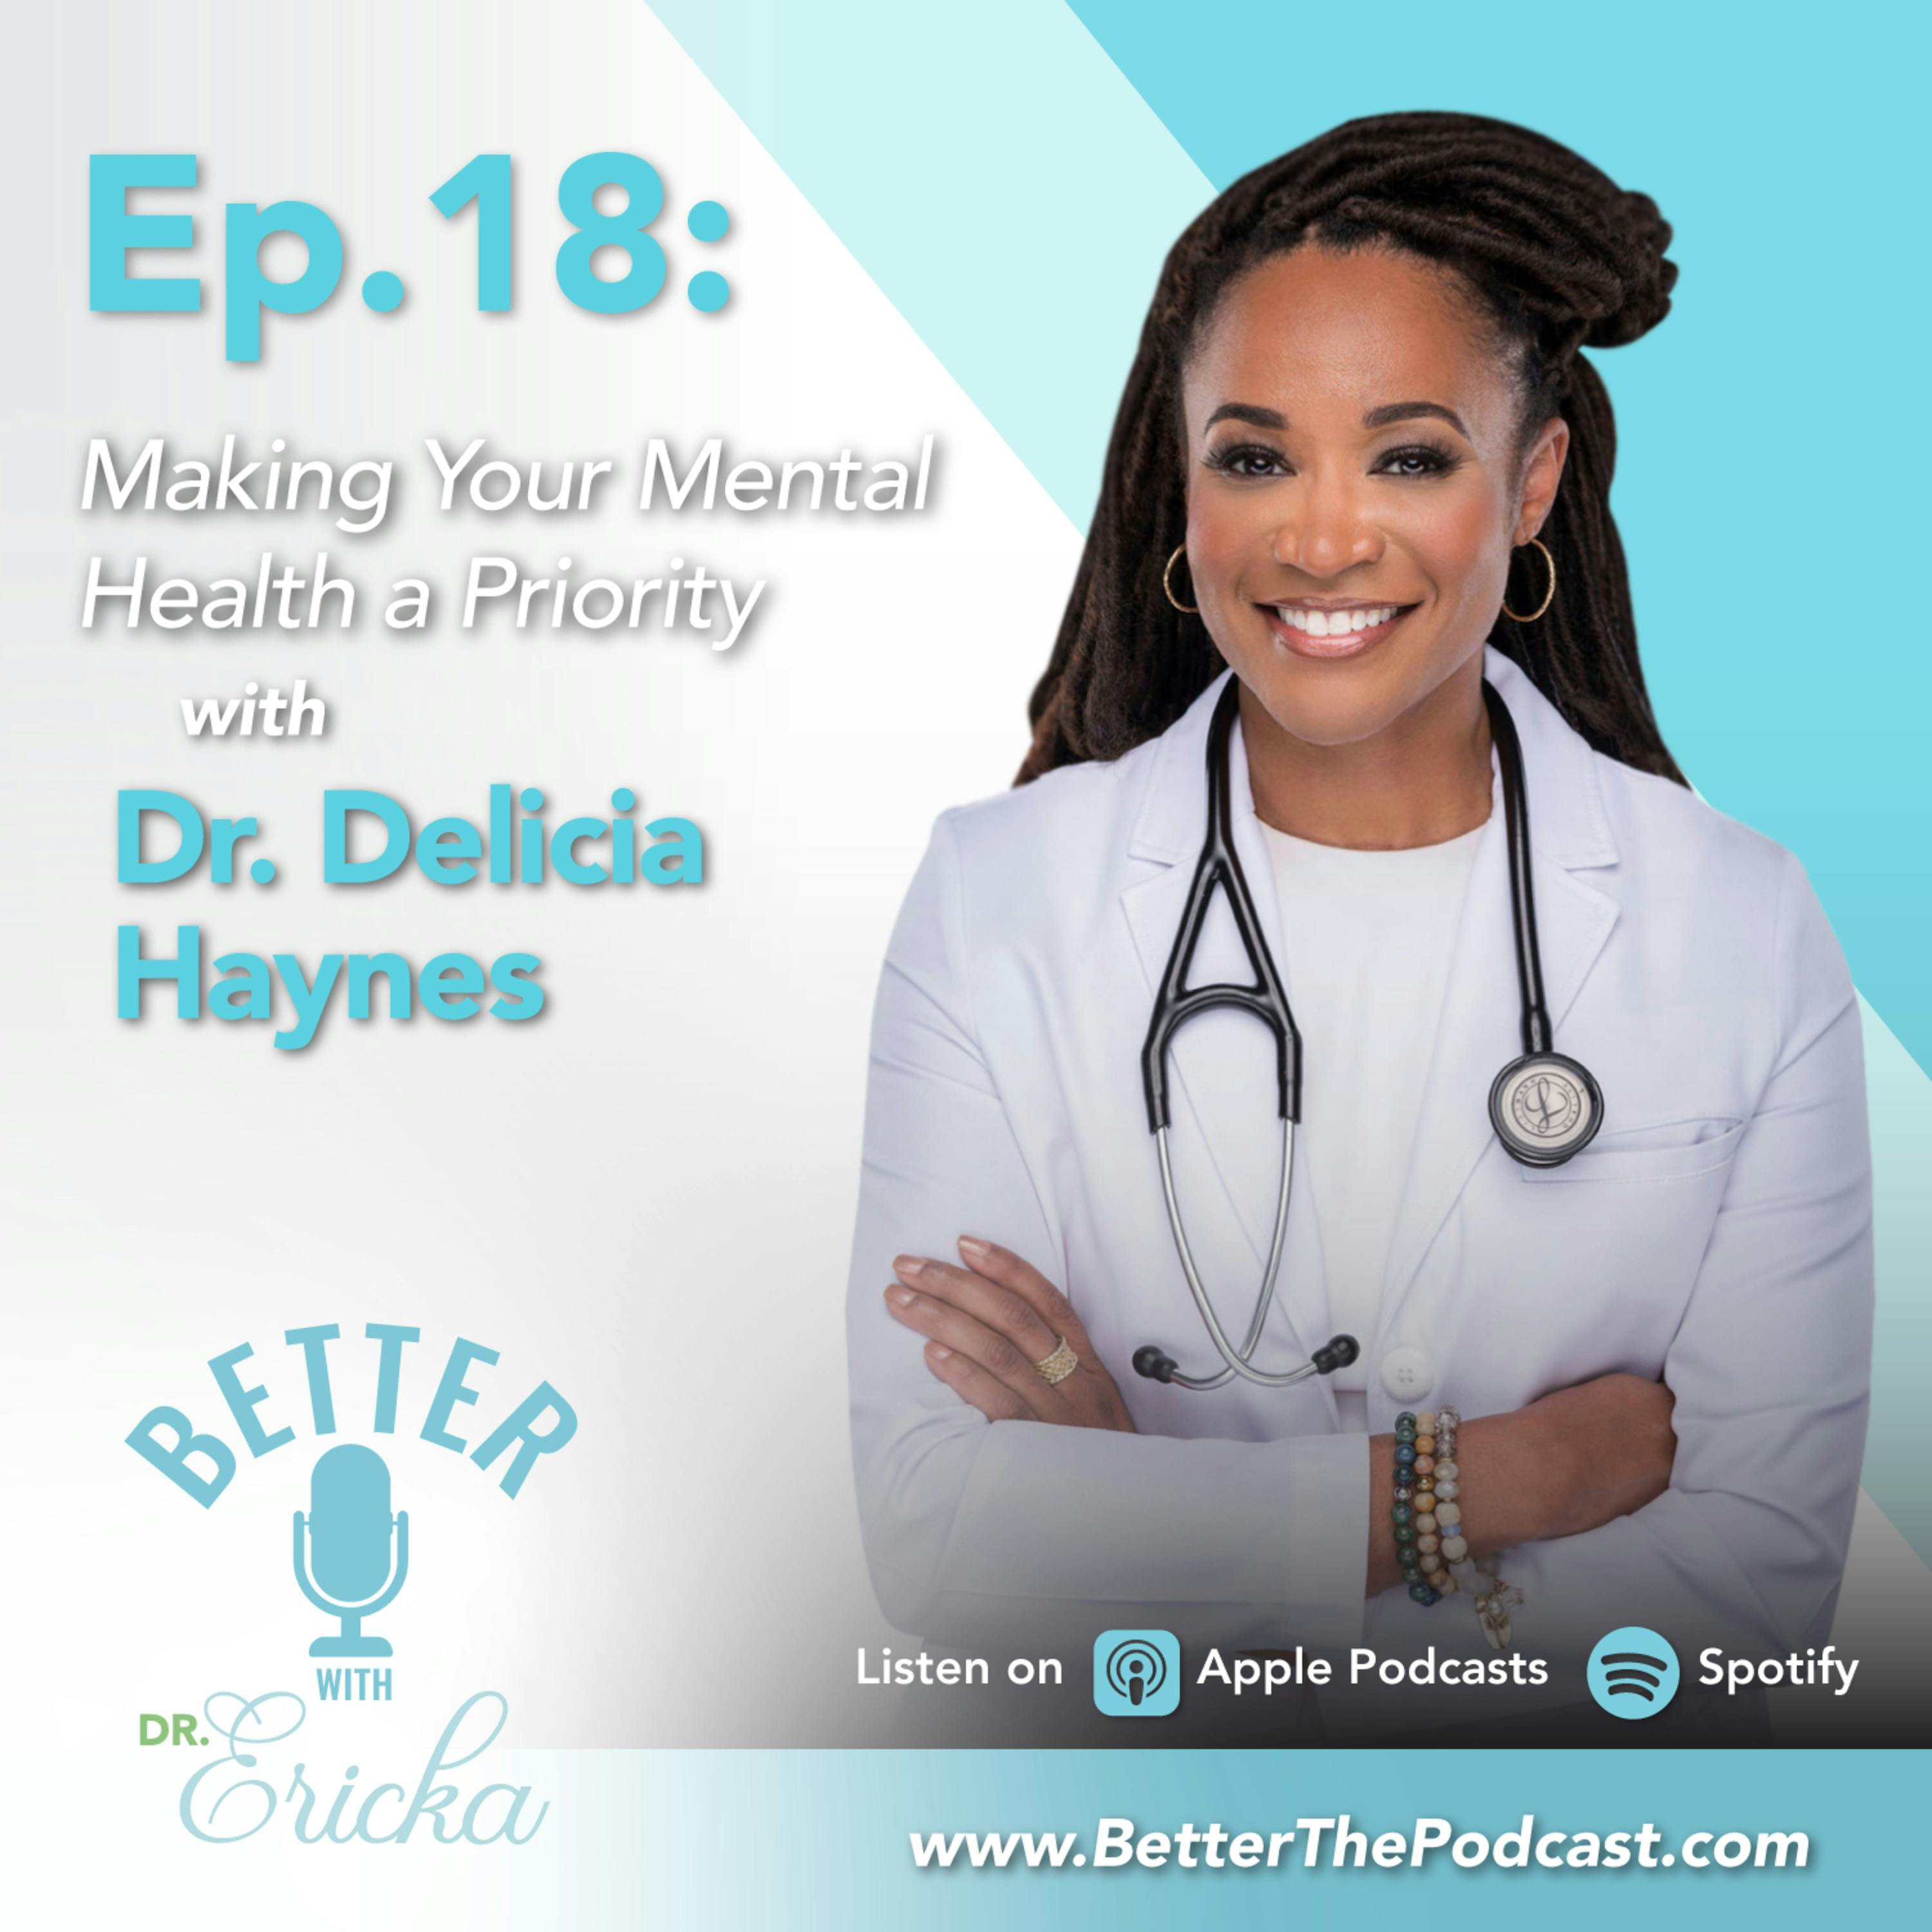 Making Your Mental Health a Priority with Dr. Delicia Haynes